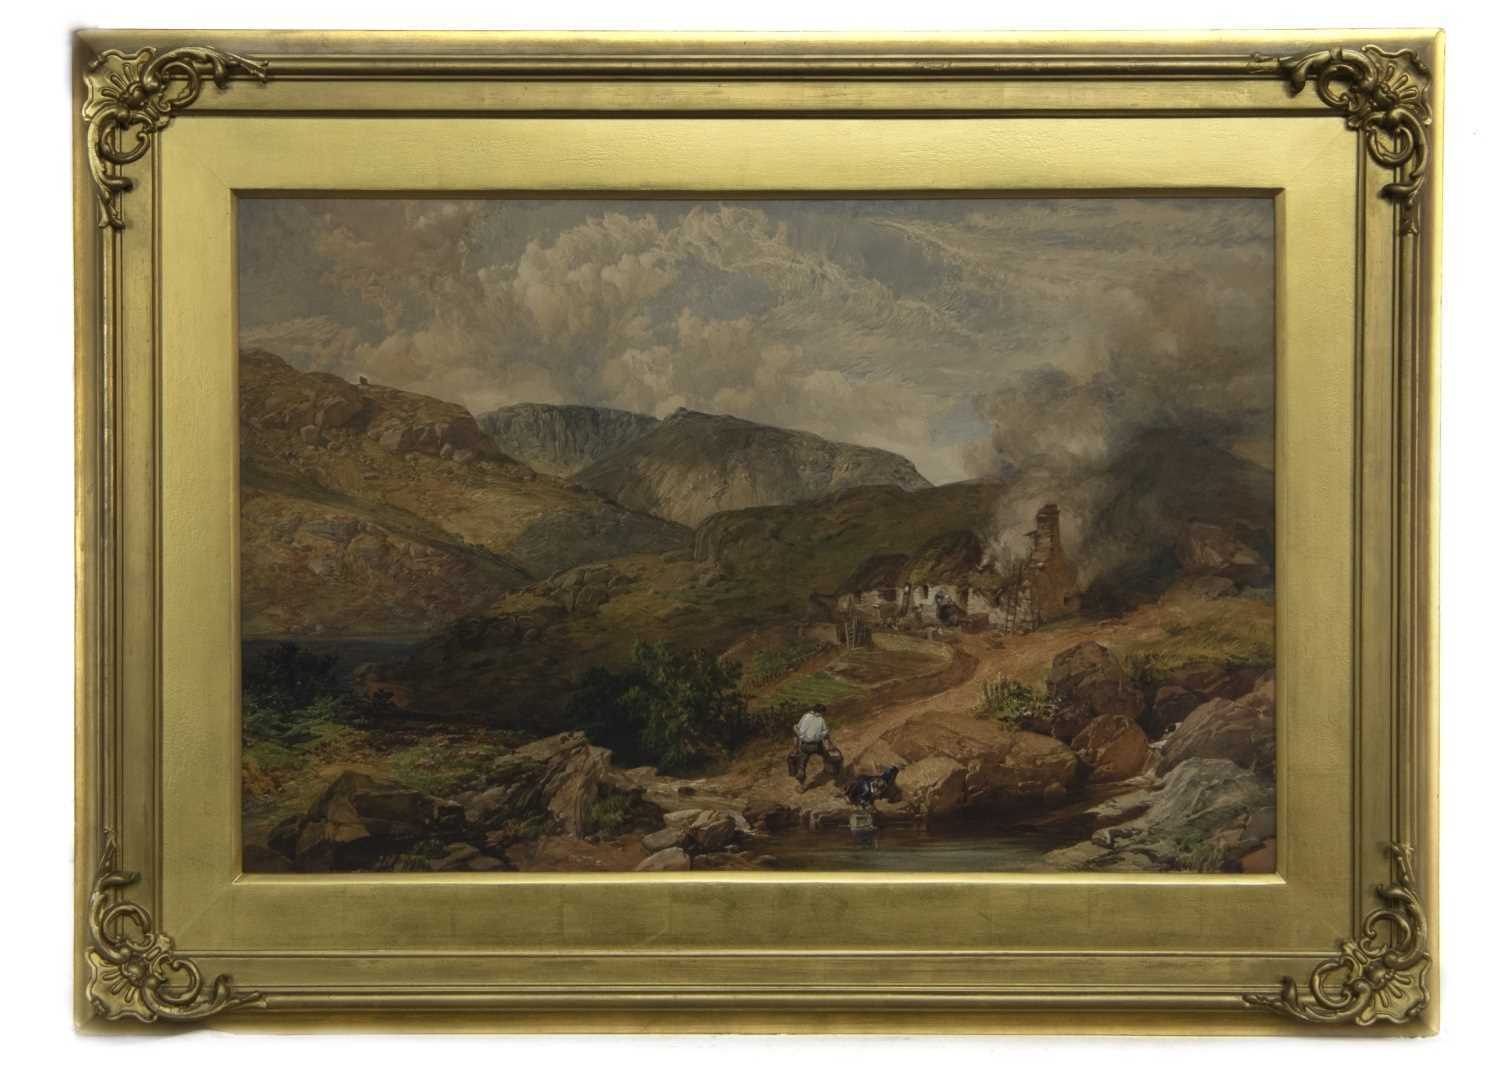 Lot 63 - LOCH ECK, A WATERCOLOUR BY WILLIAM SIMPSON